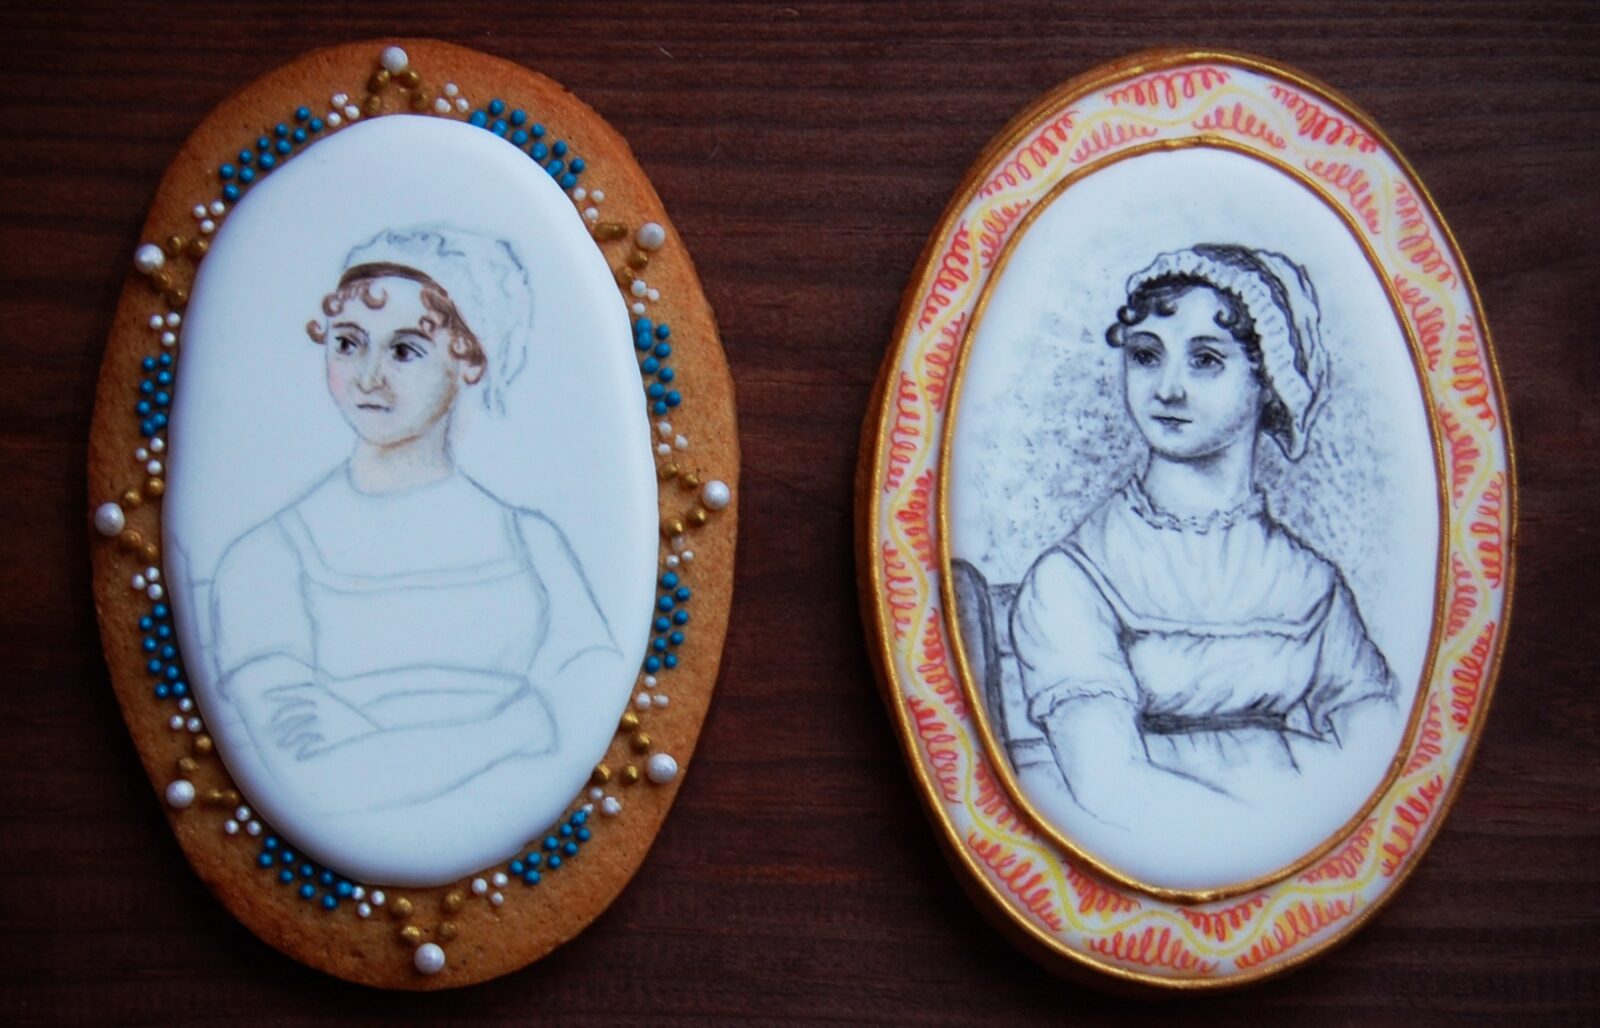 Two oval biscuits with Jane Austen's portrait painted on them in icing. ©Ella Hawkins